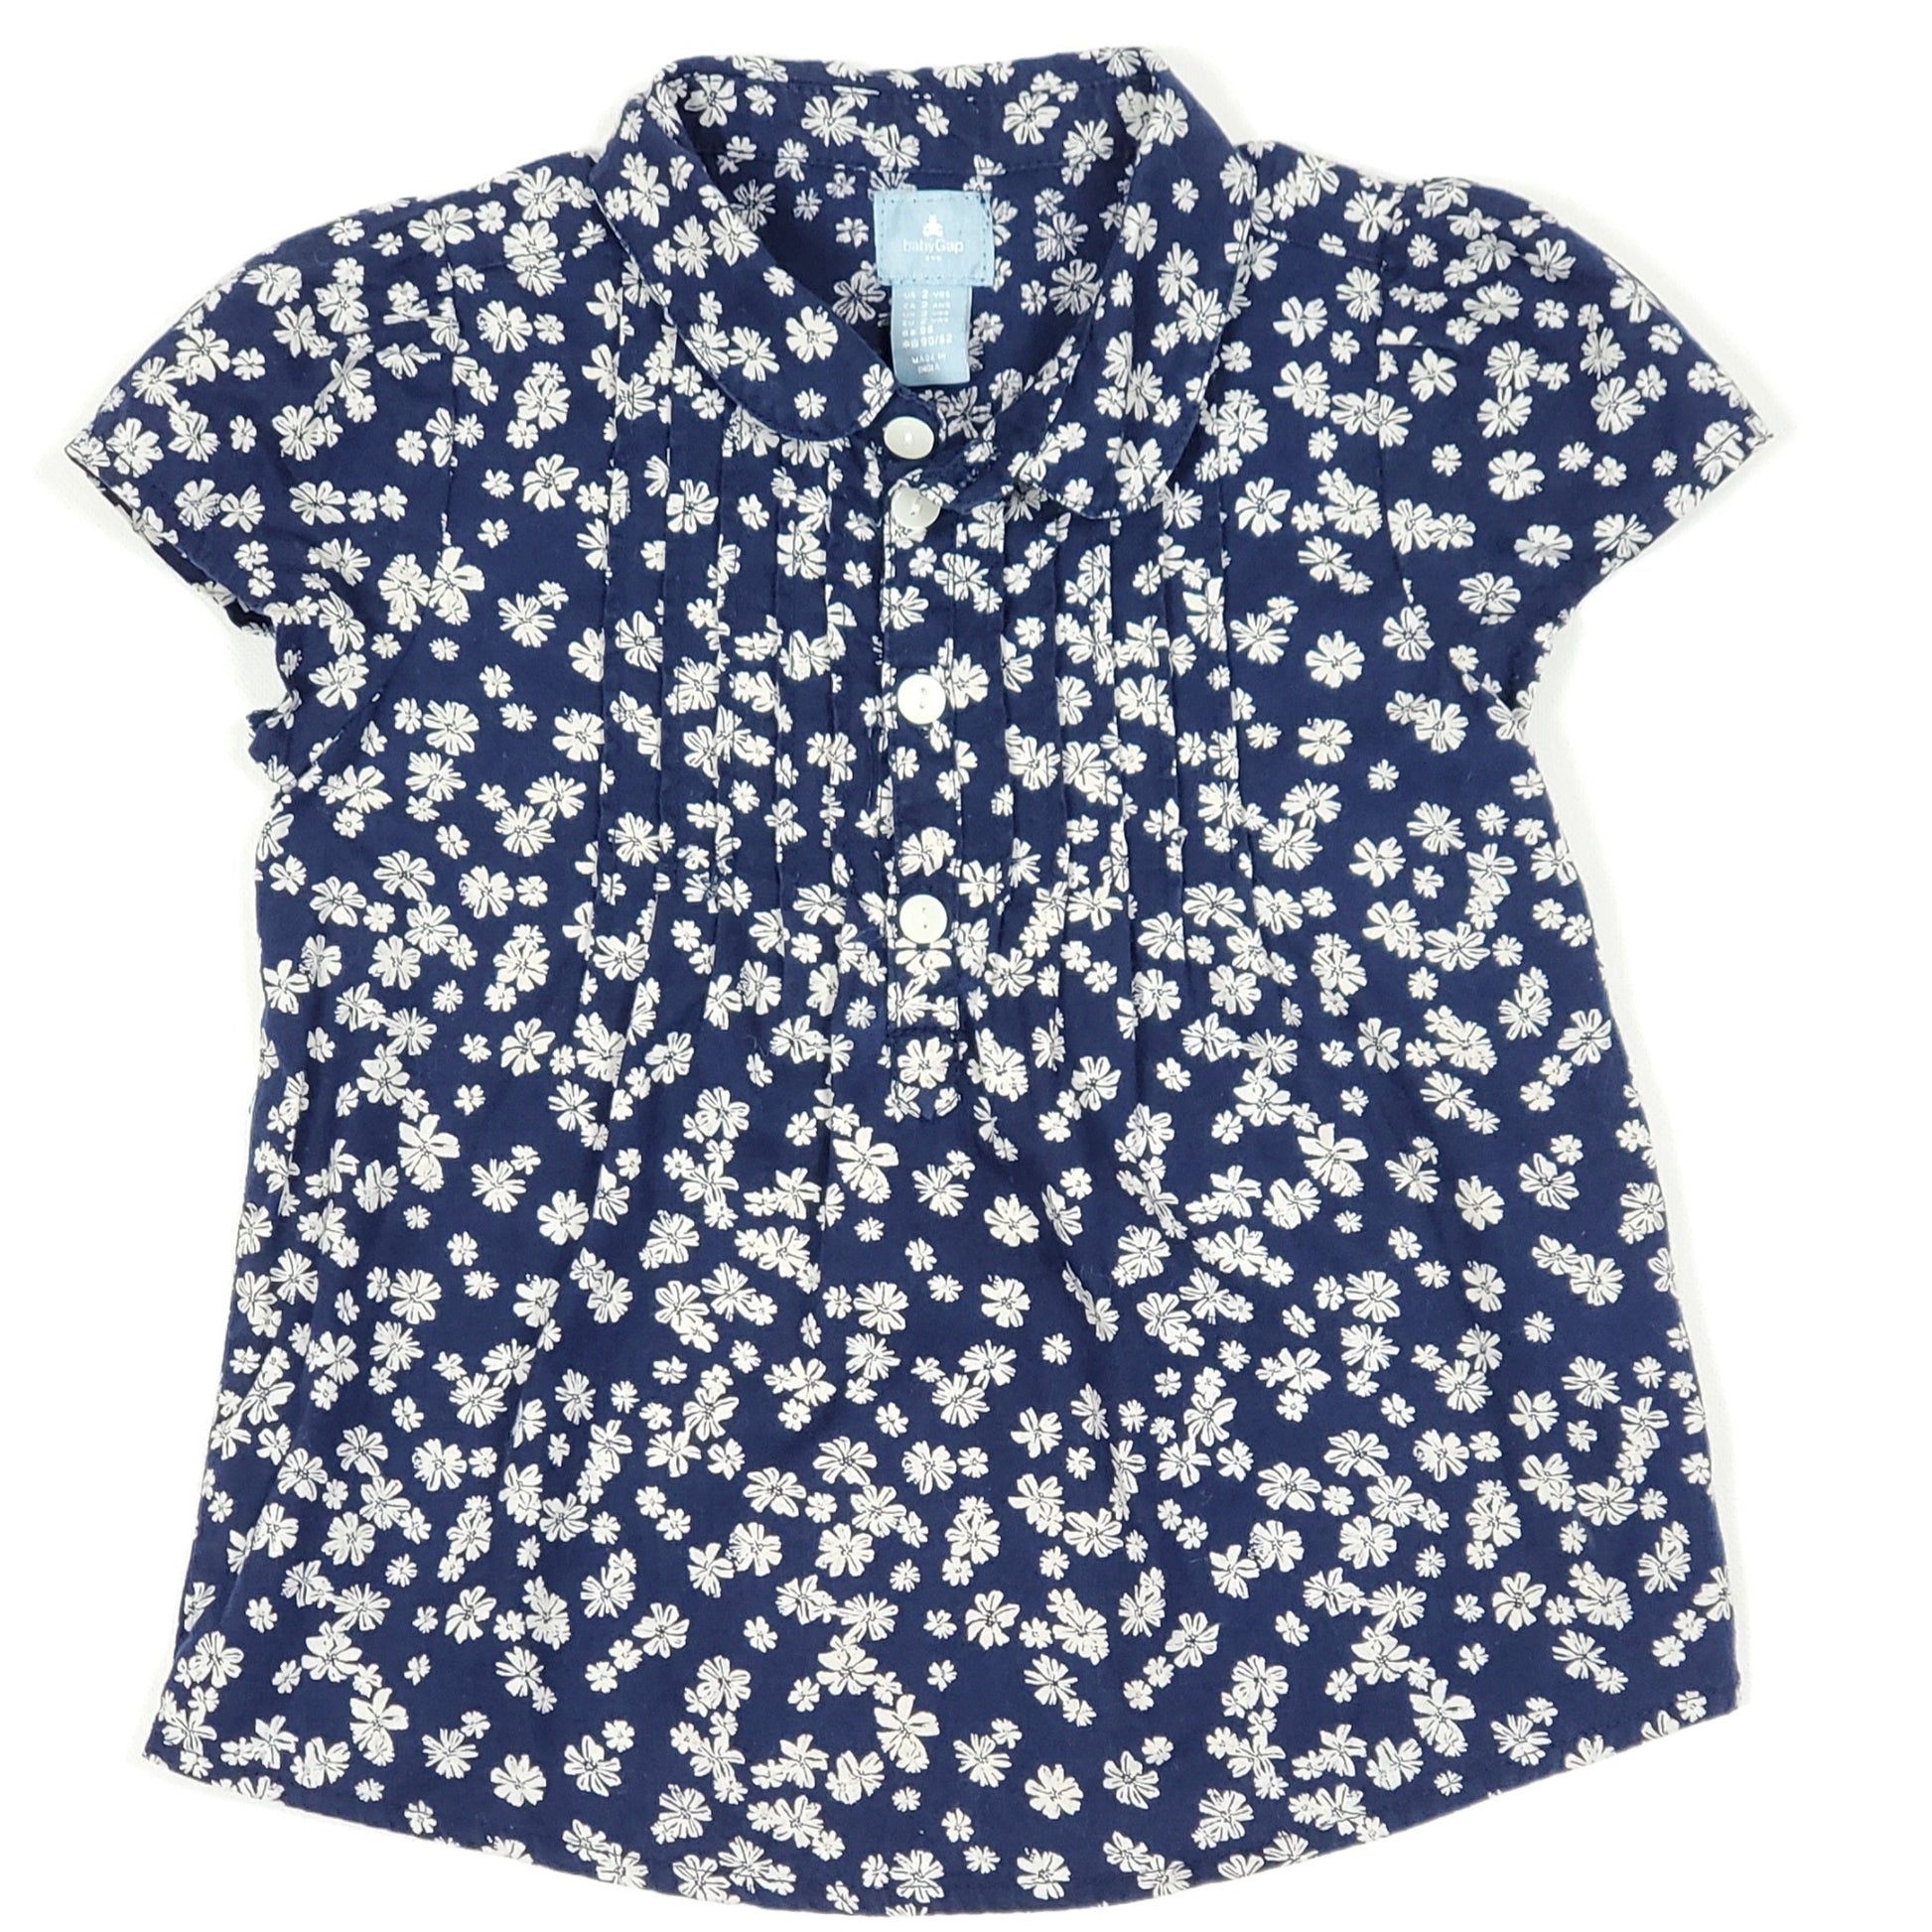 Baby Gap Blue White Floral Girls Top 2T Used, front